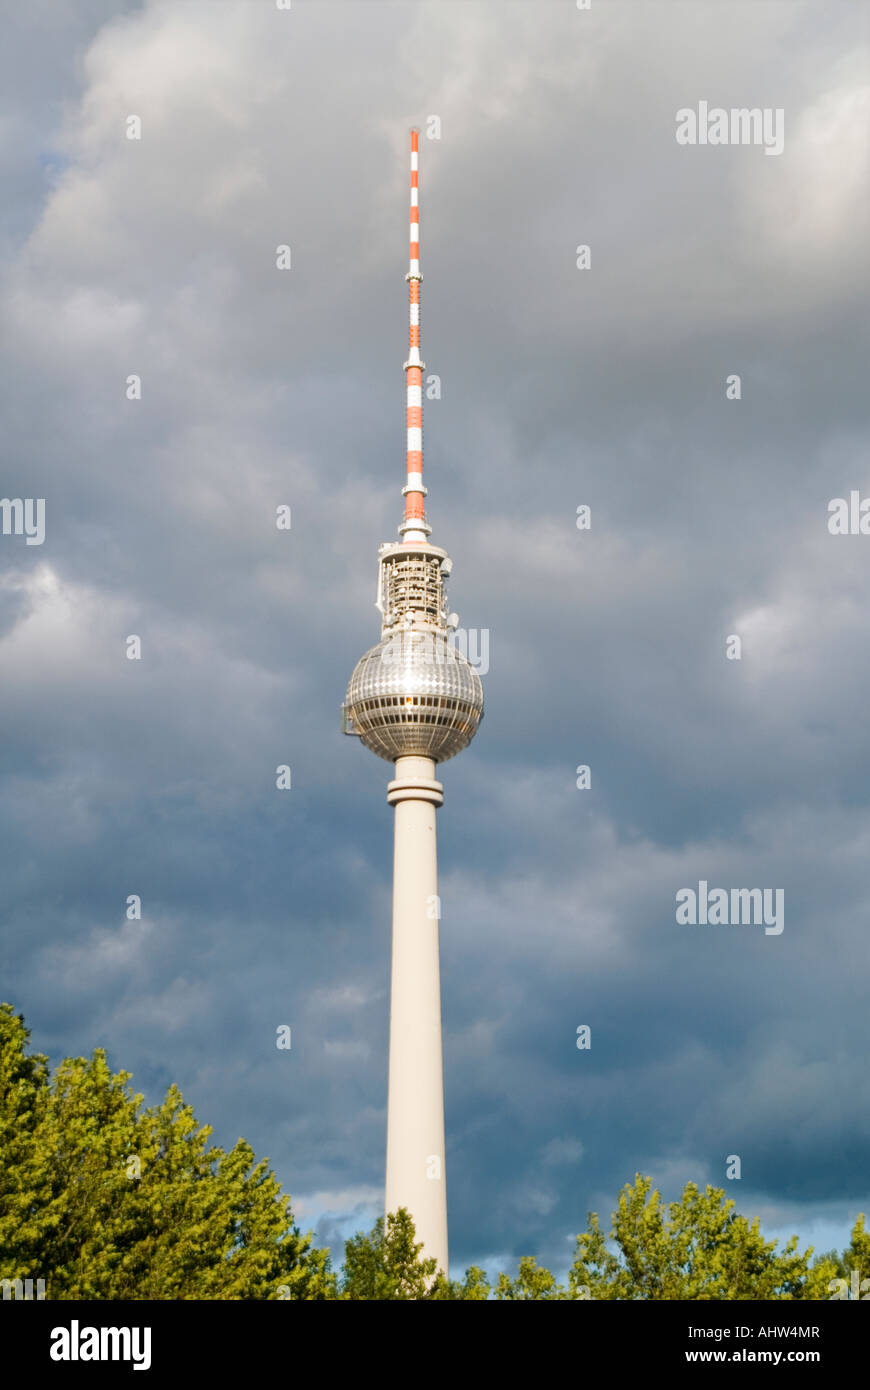 Vertical view of the TV tower 'Fernsehturm' against dark grey storm clouds. Stock Photo